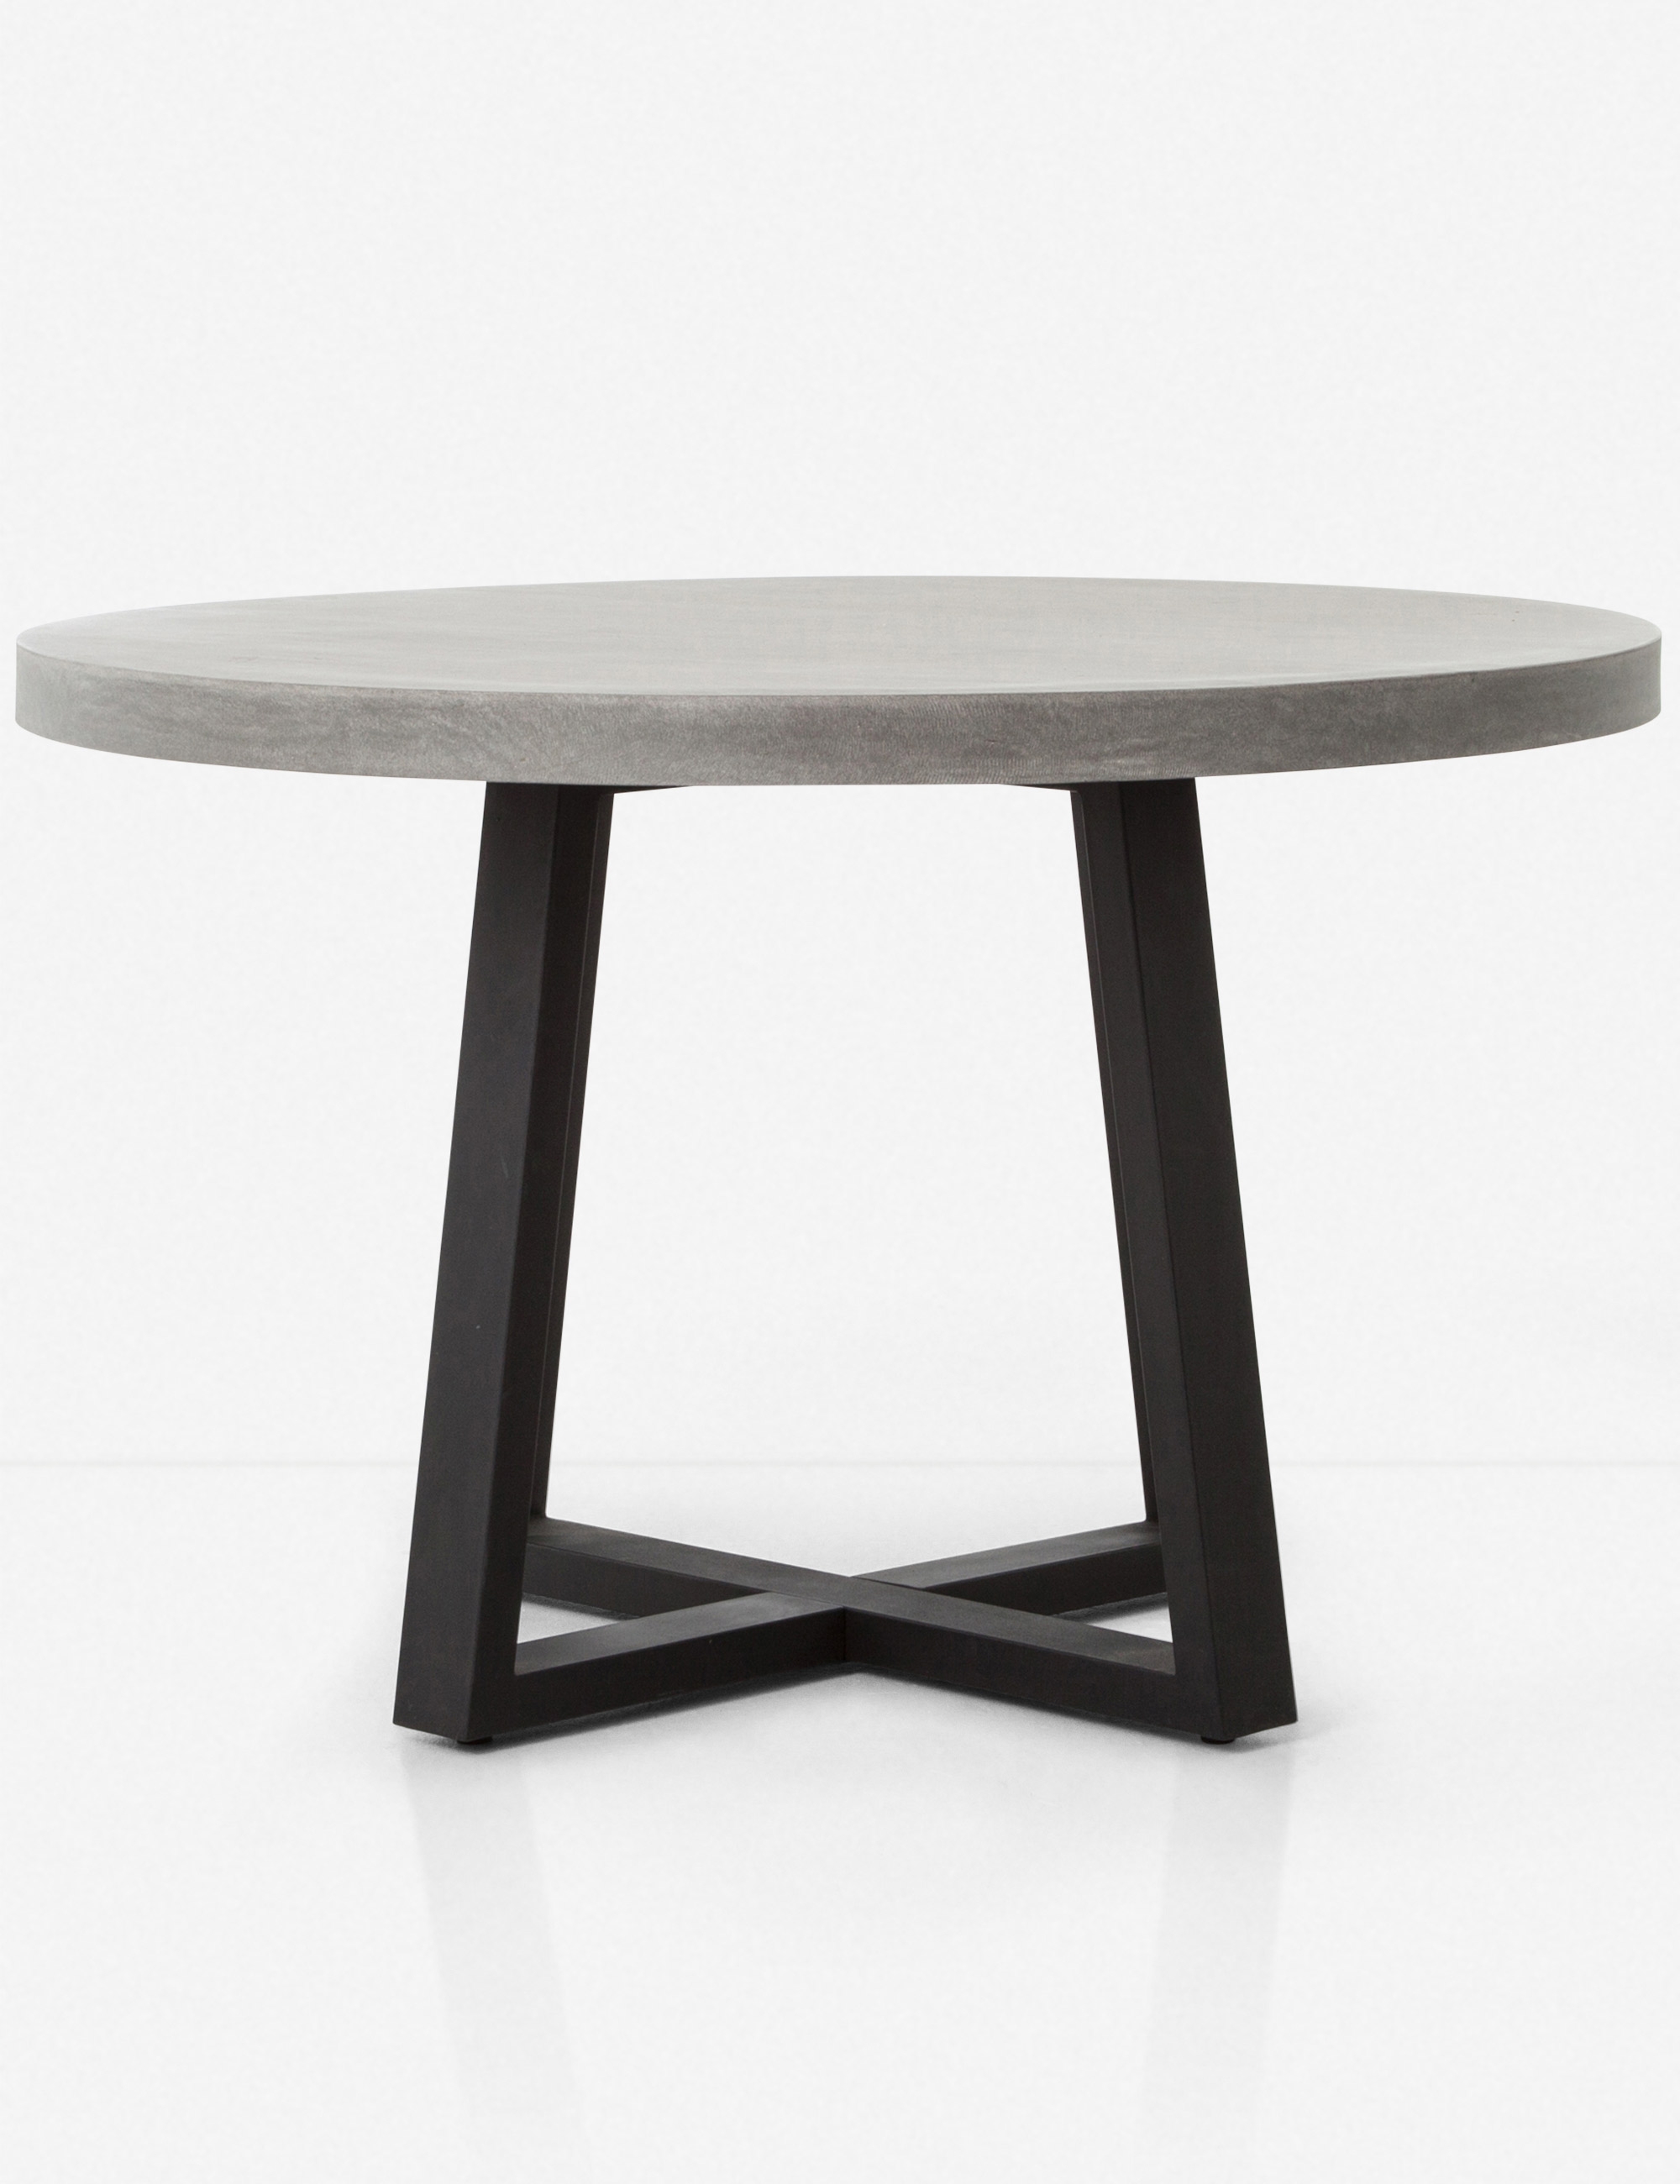 Agatha Indoor / Outdoor Round Dining Table - Image 3